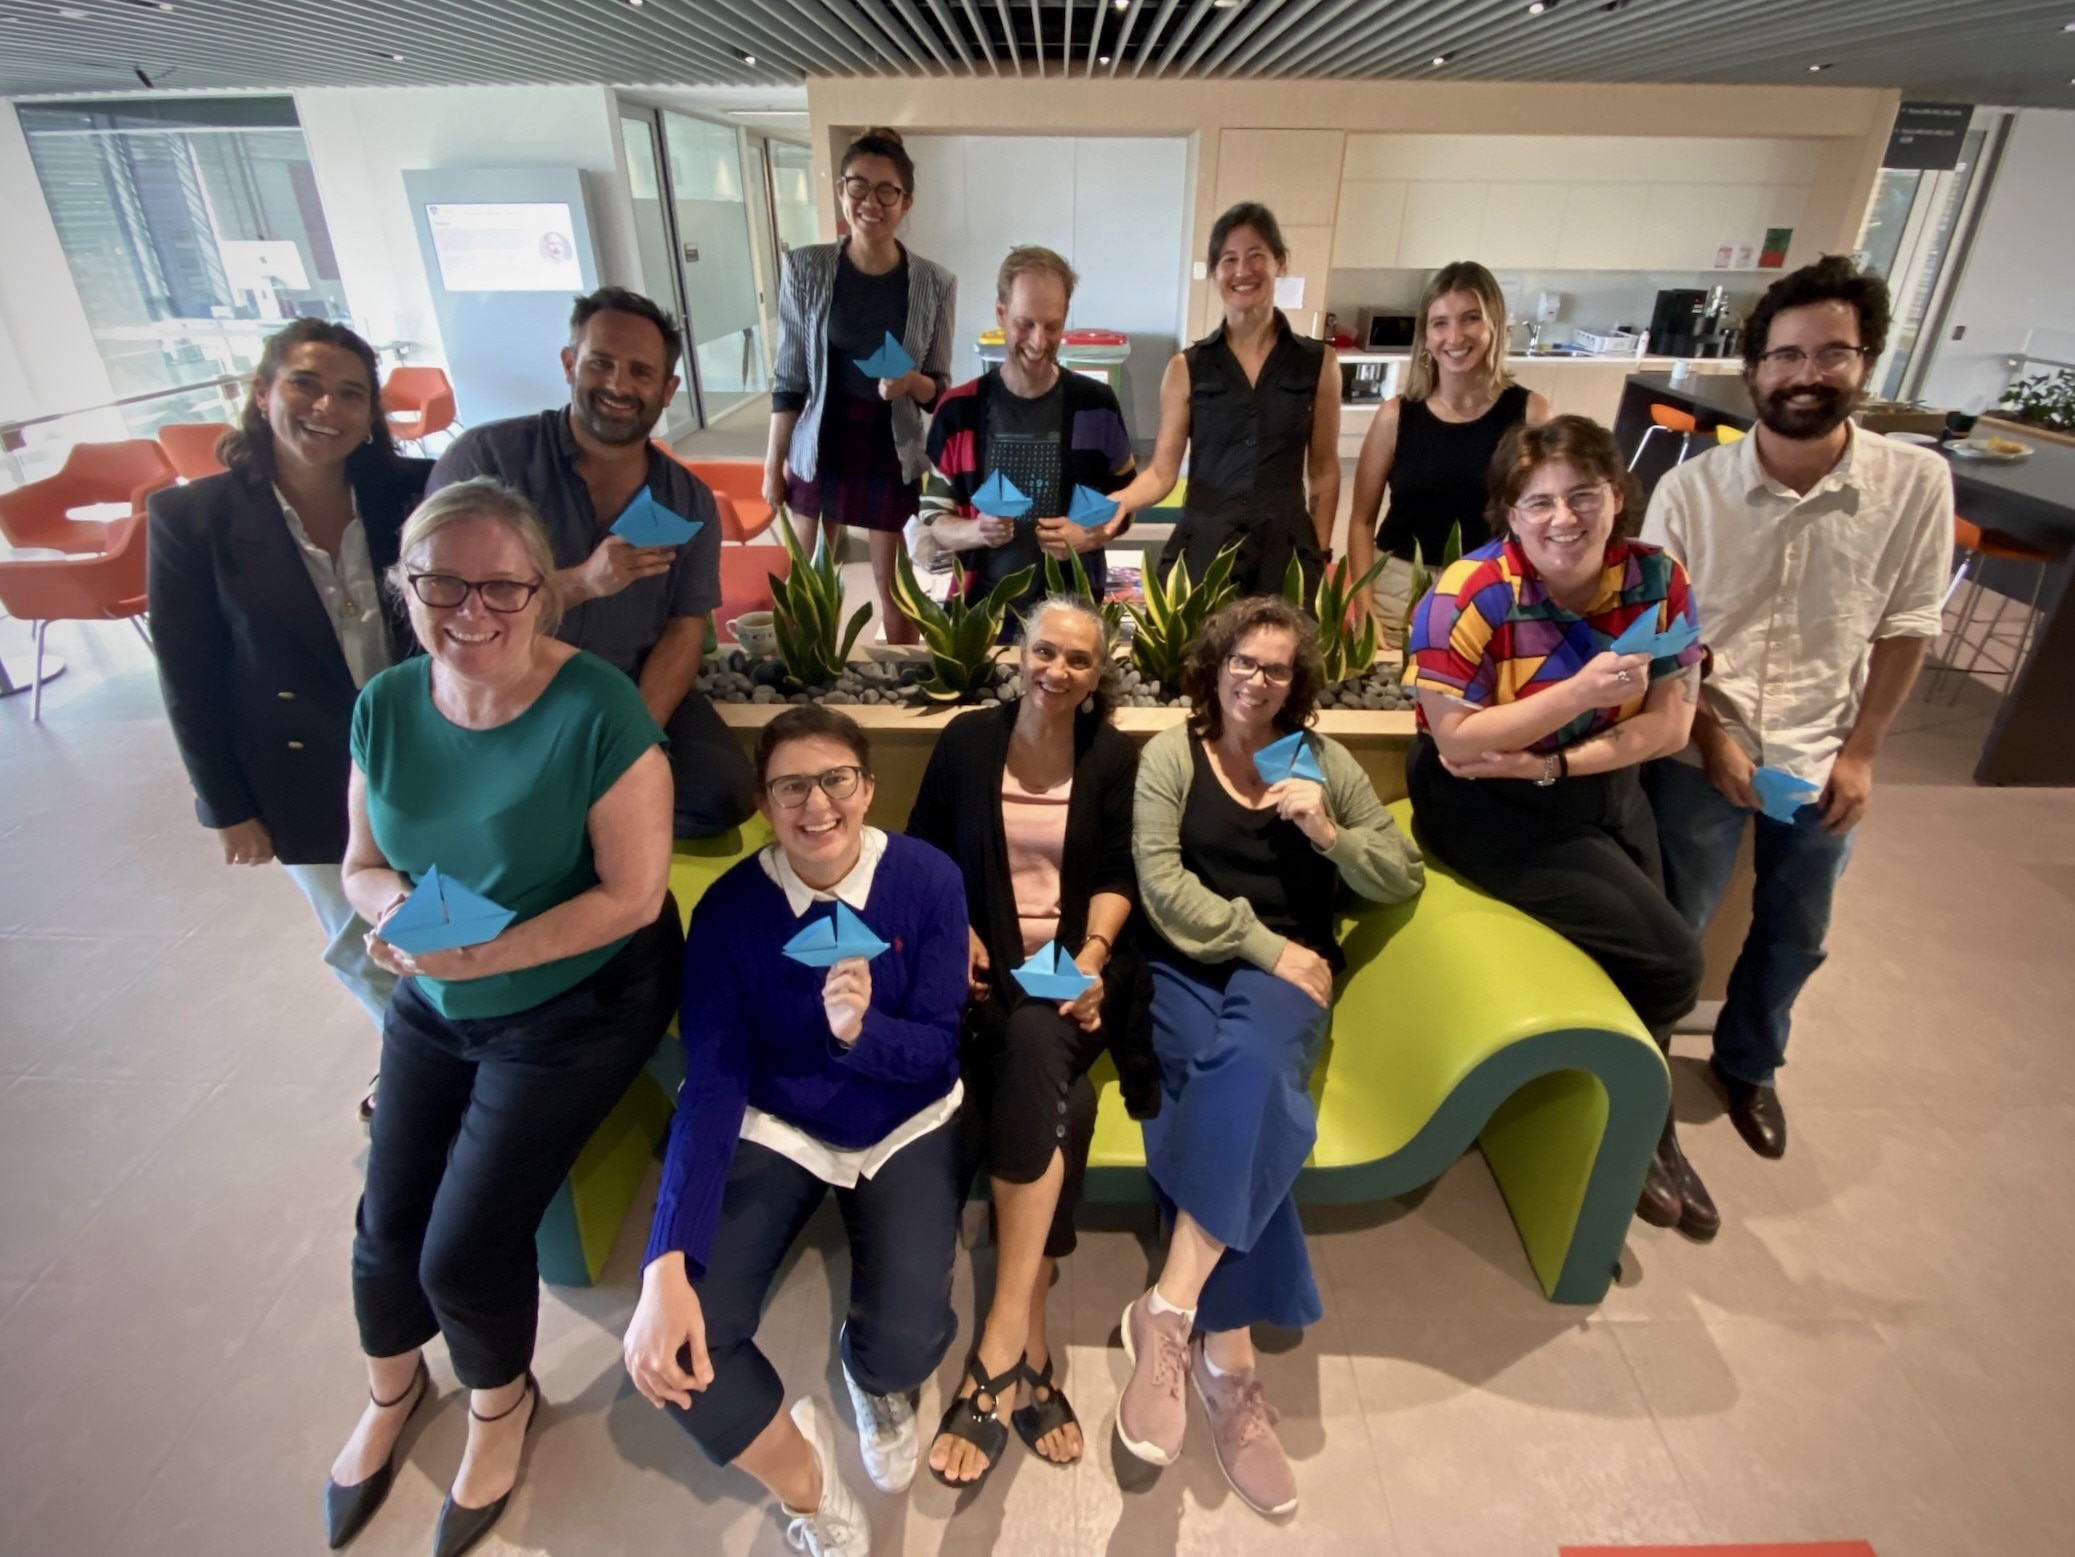 The ABC Science digital team smiles for a photo, with some staff holding paper boats.